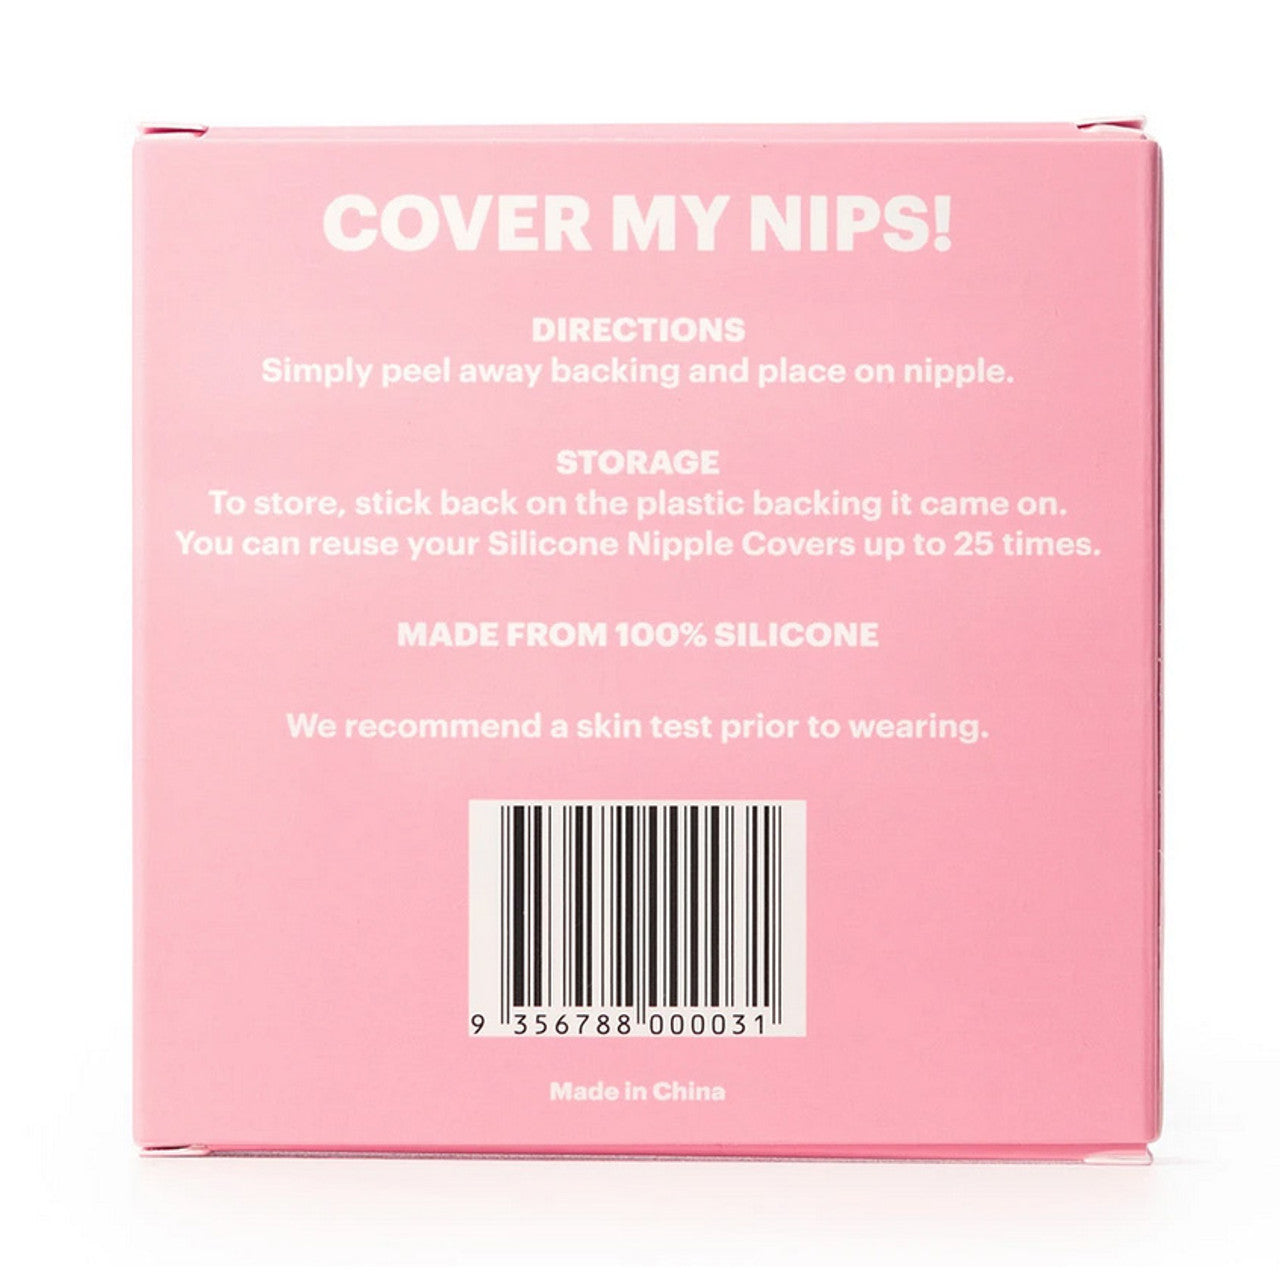 Booby Tape Silicone Nipple Covers –